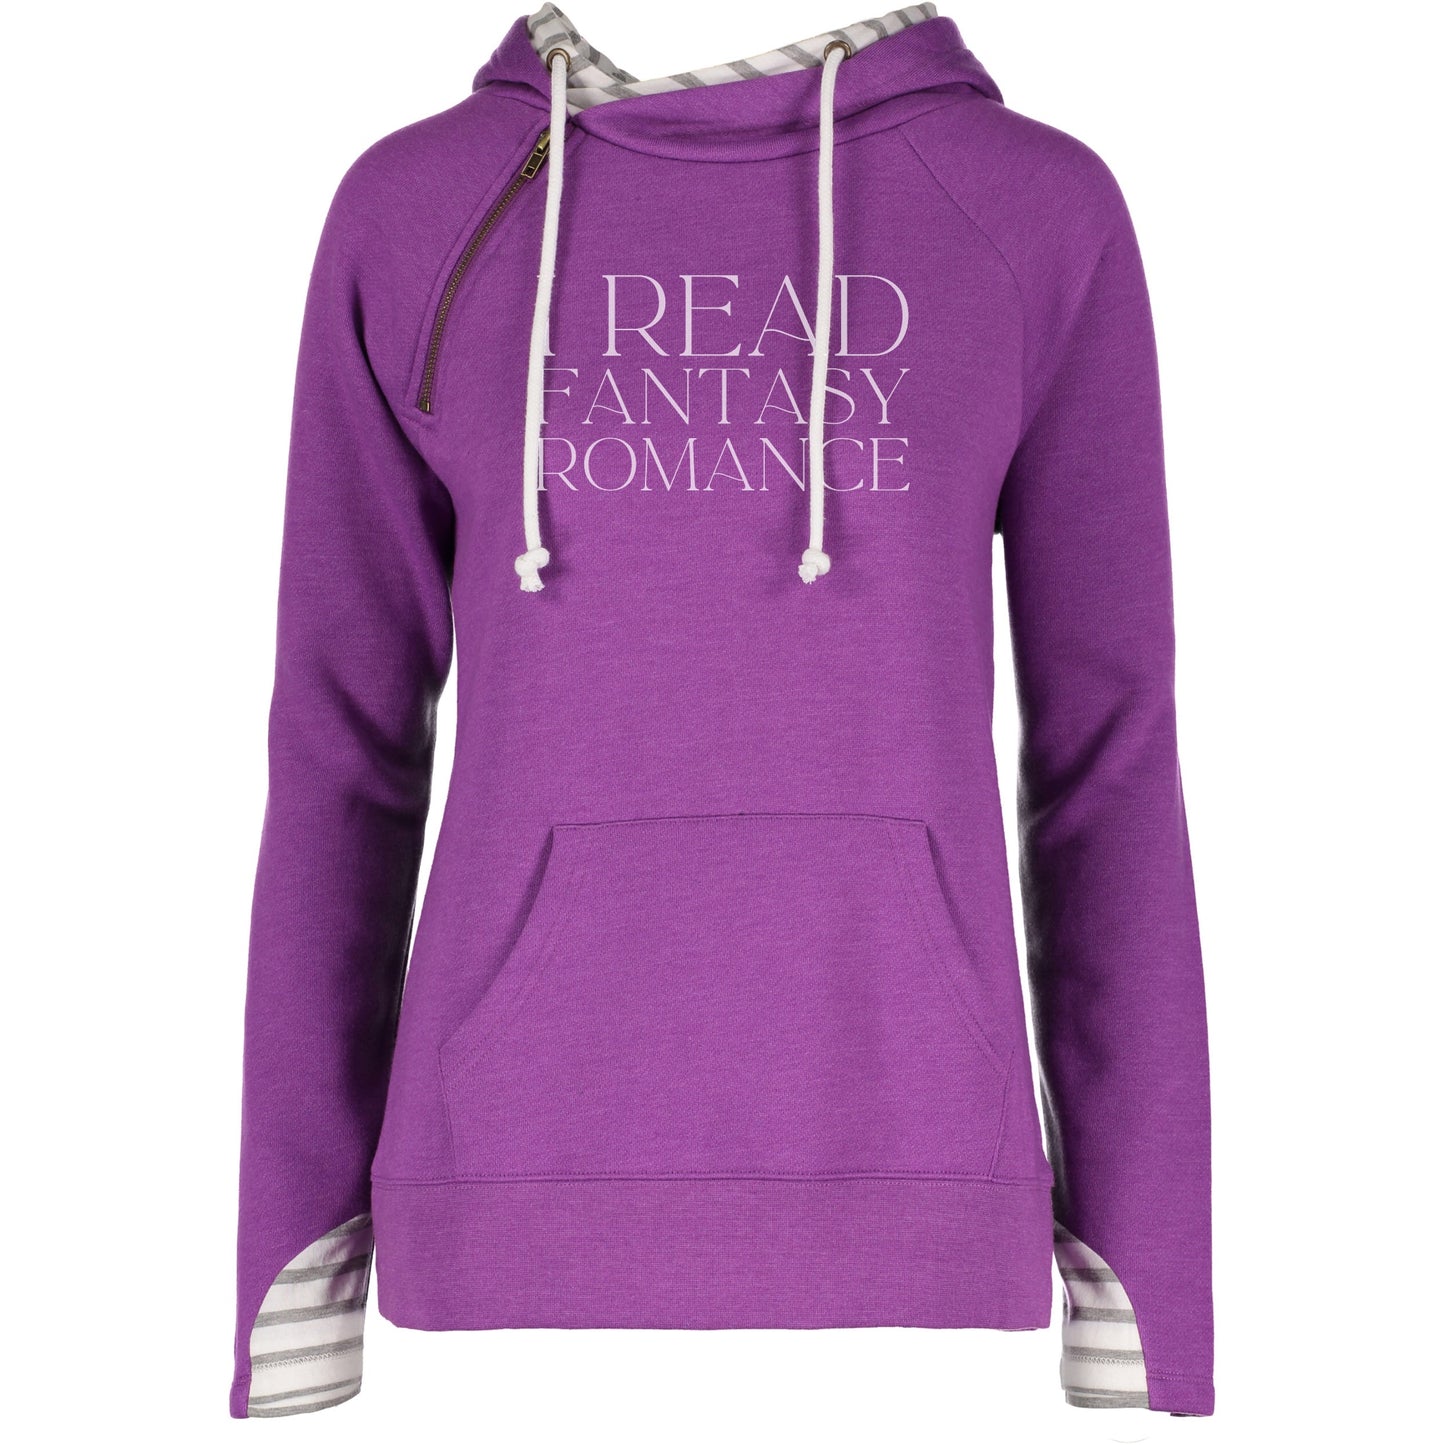 Read Romantasy - Striped Double Hoodie